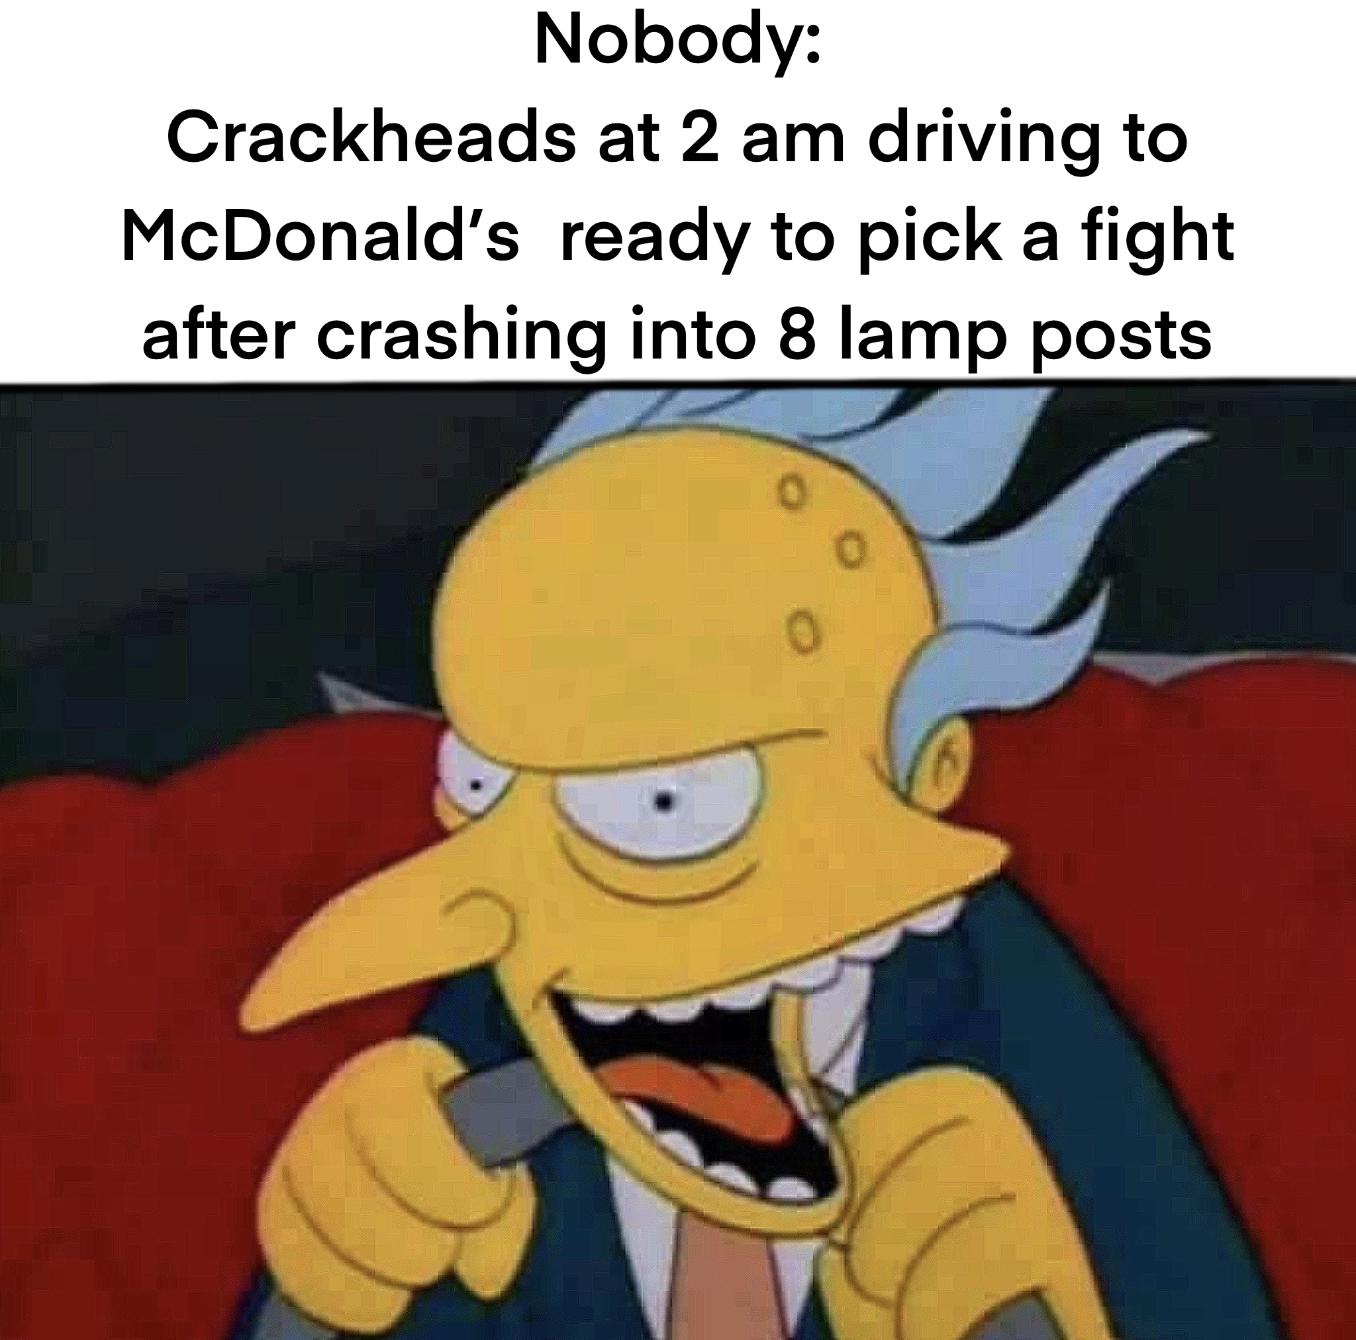 dank memes - funny memes - simpsons smear frames - Nobody Crackheads at 2 am driving to McDonald's ready to pick a fight after crashing into 8 lamp posts 0